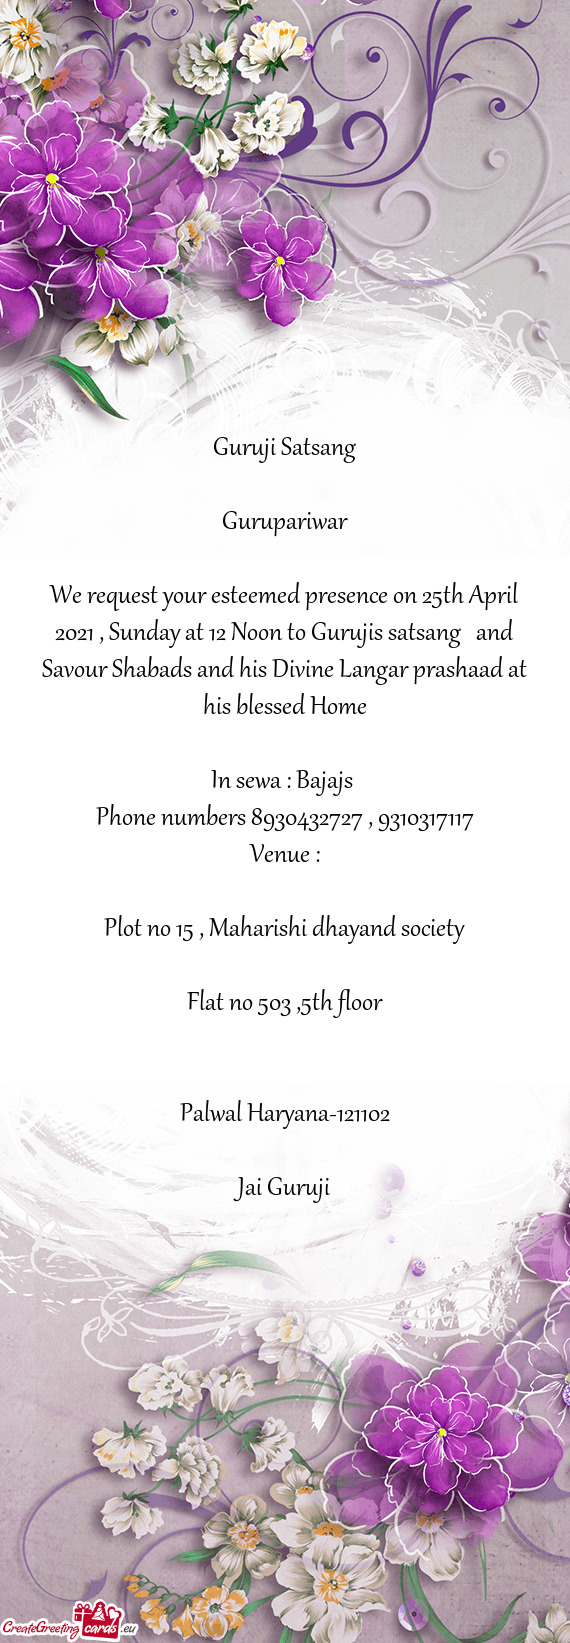 We request your esteemed presence on 25th April 2021 , Sunday at 12 Noon to Gurujis satsang and Sa